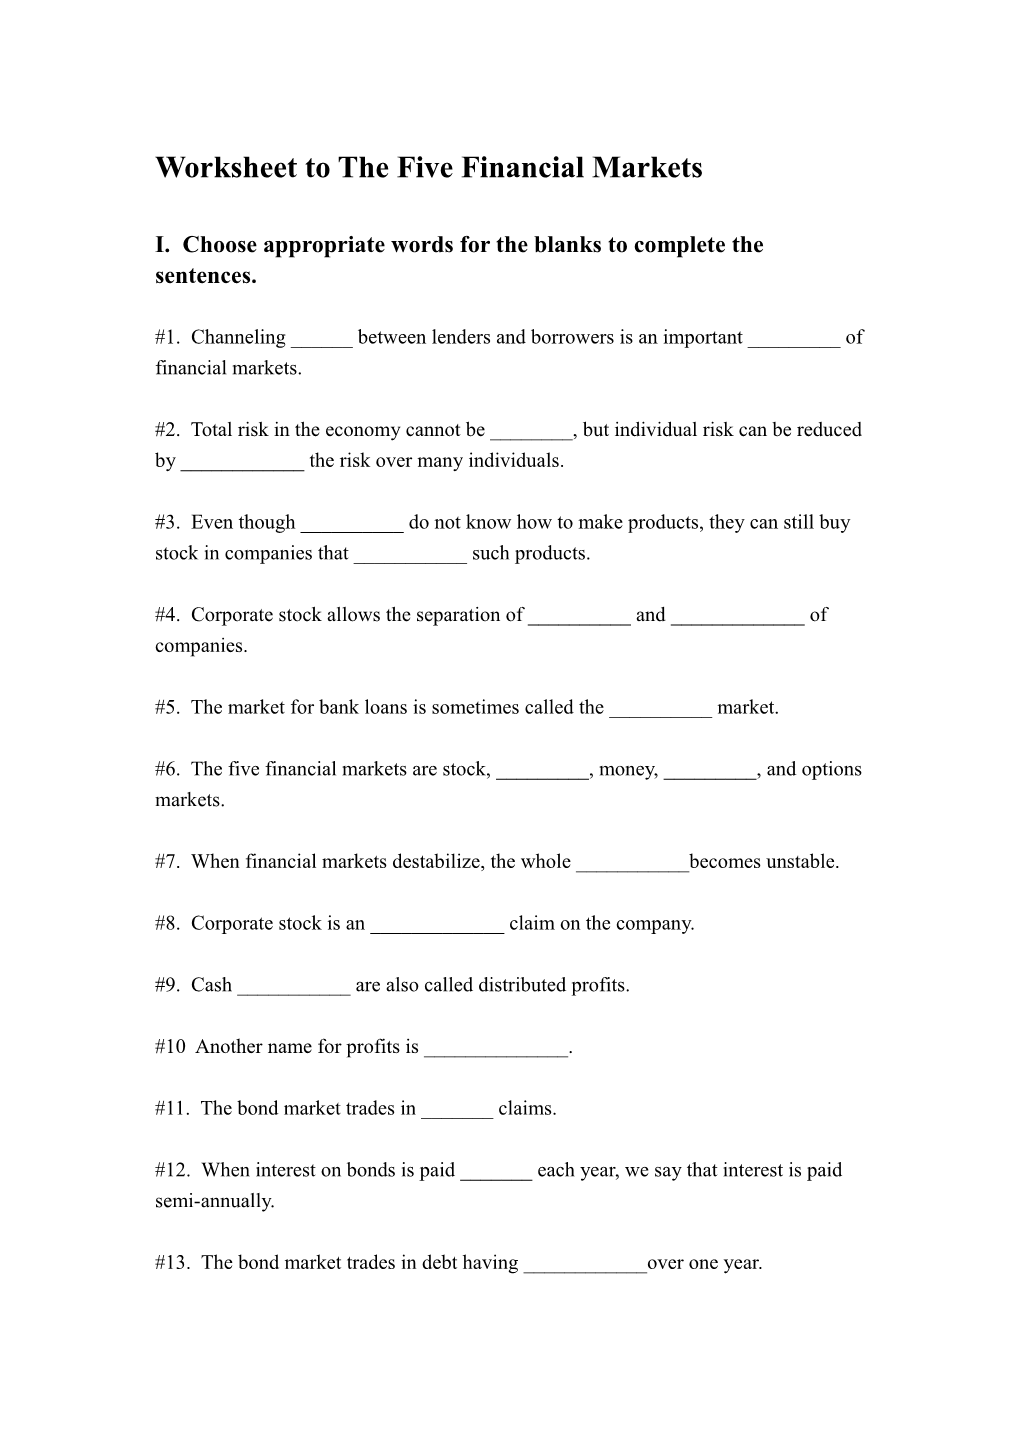 Worksheet to the Five Financial Markets